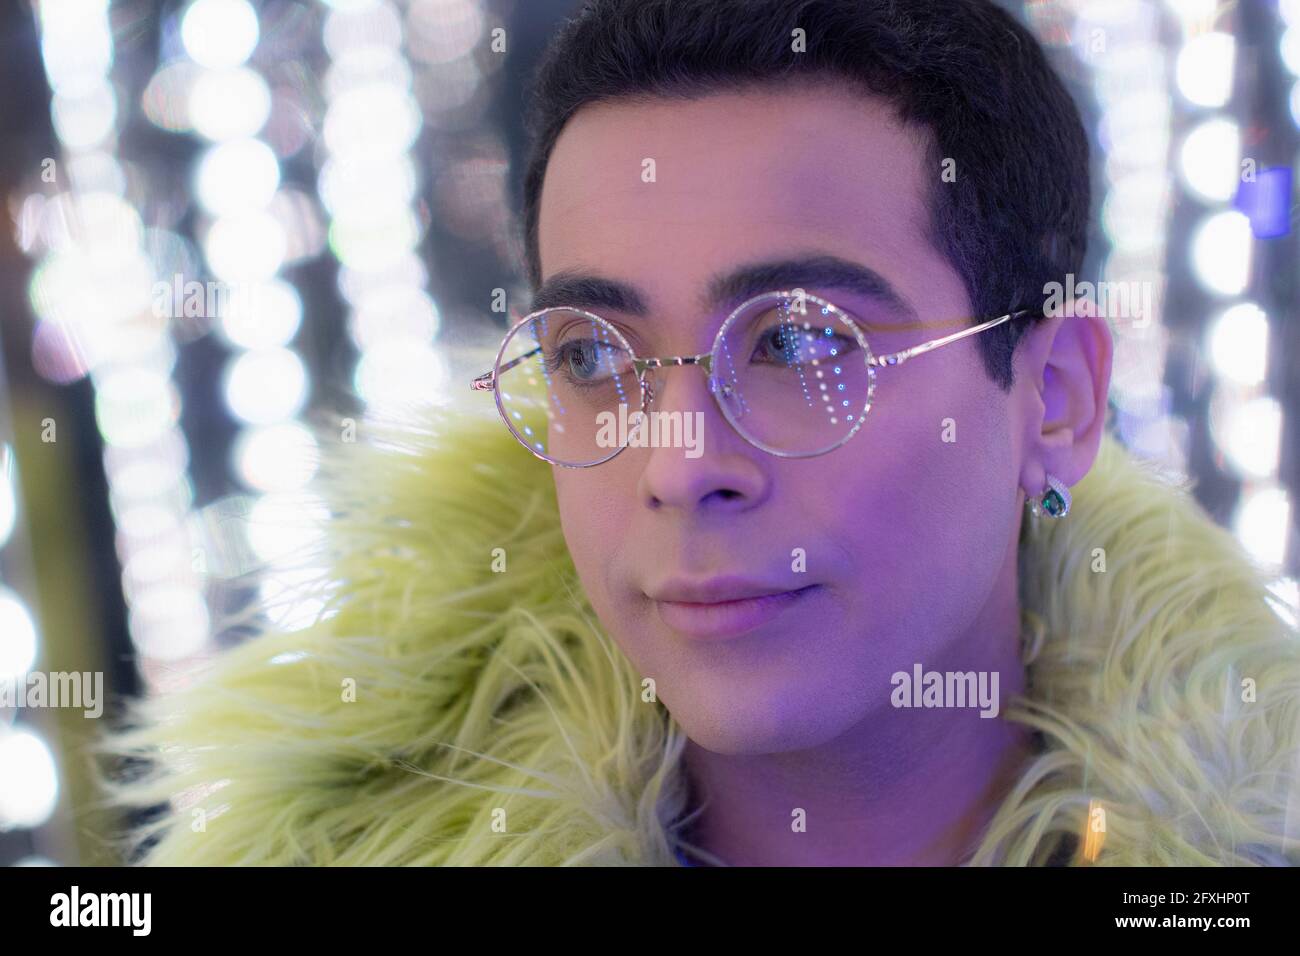 Close up portrait young man in feather boa and eyeglasses Stock Photo